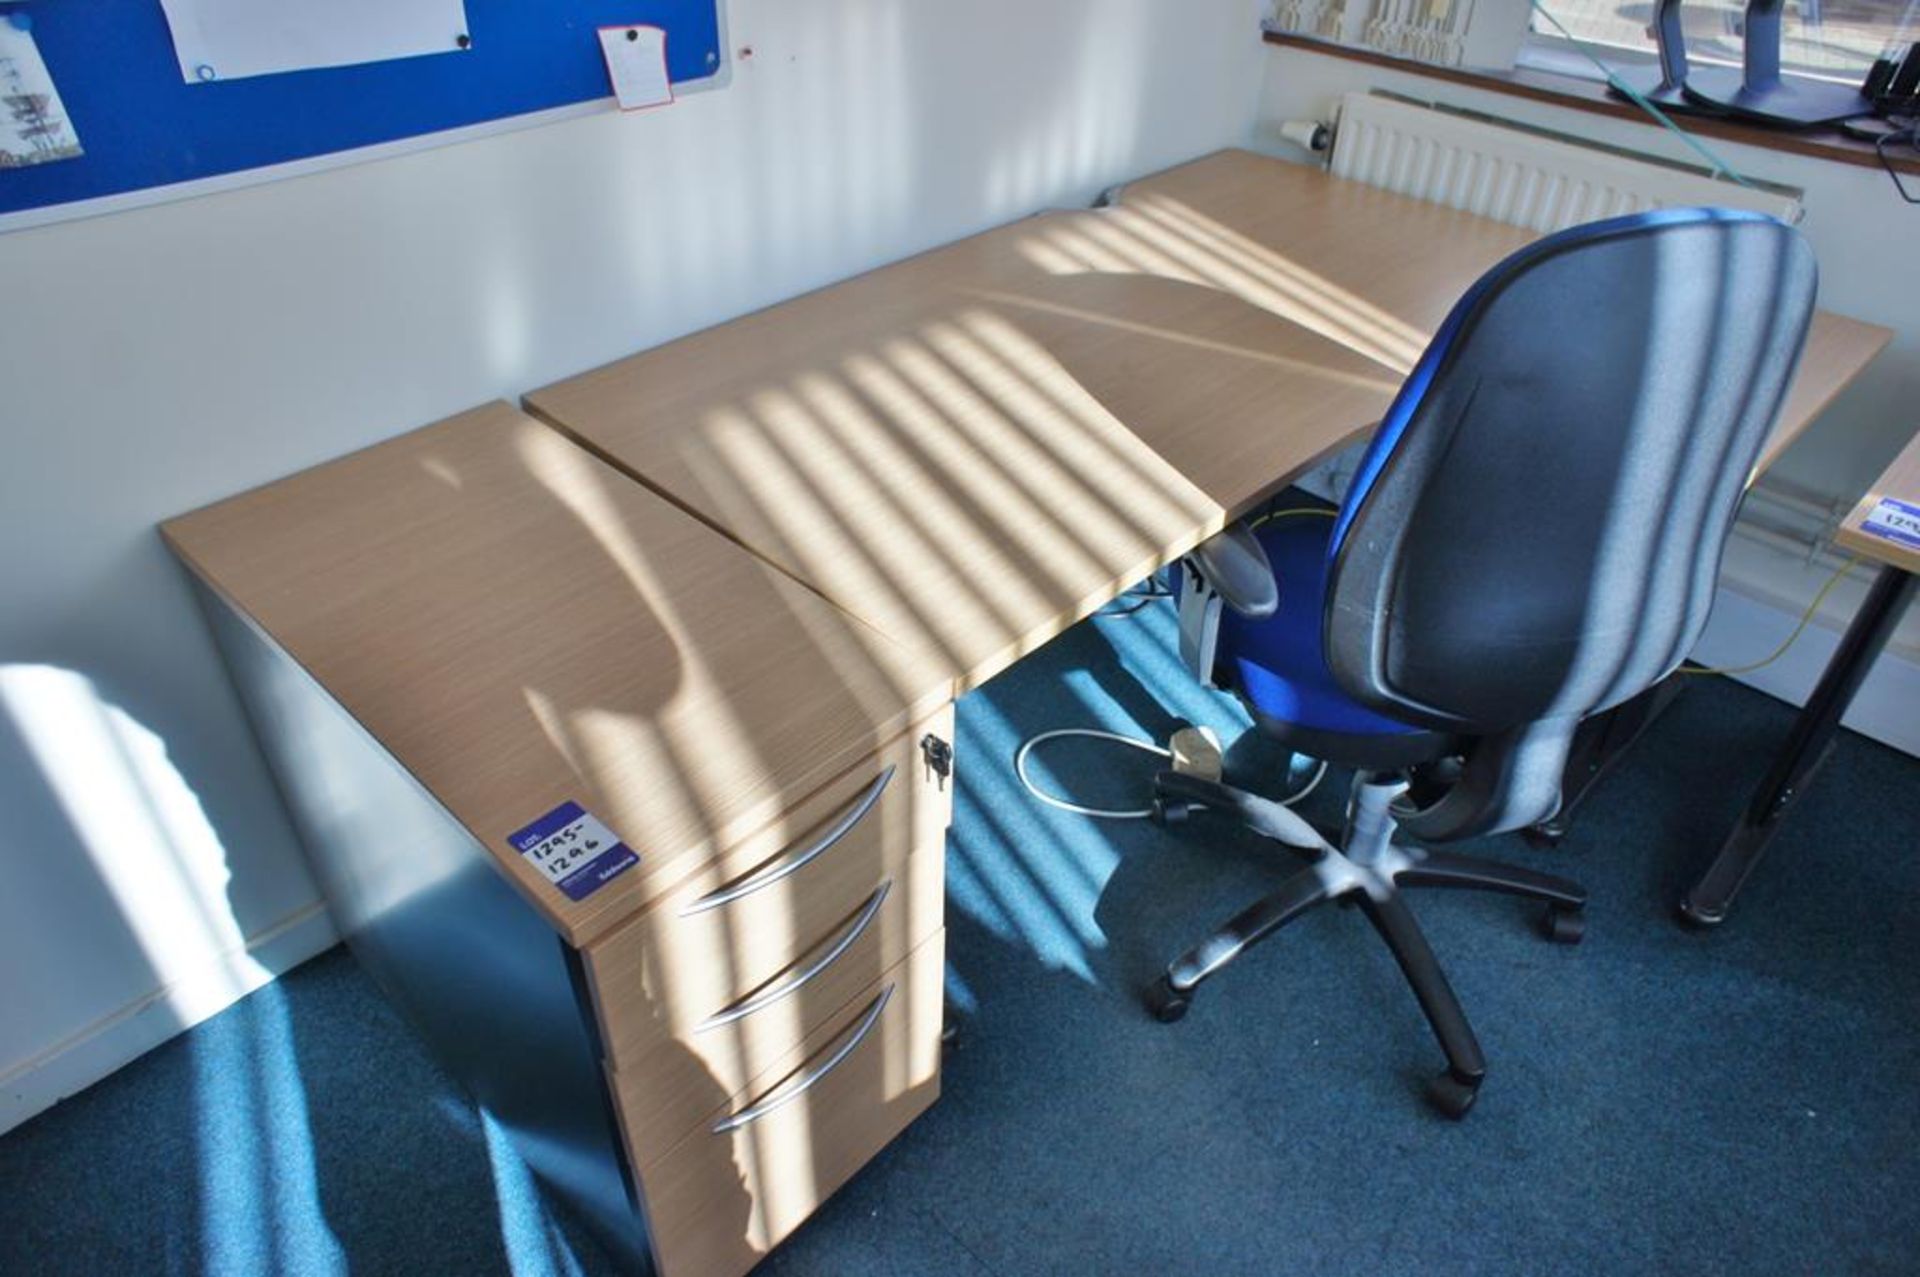 * Oak Effect R/H Radius Desk 1600 x 1200 with Desk High Pedestal and Upholstered Mobile Office Chair - Image 2 of 3